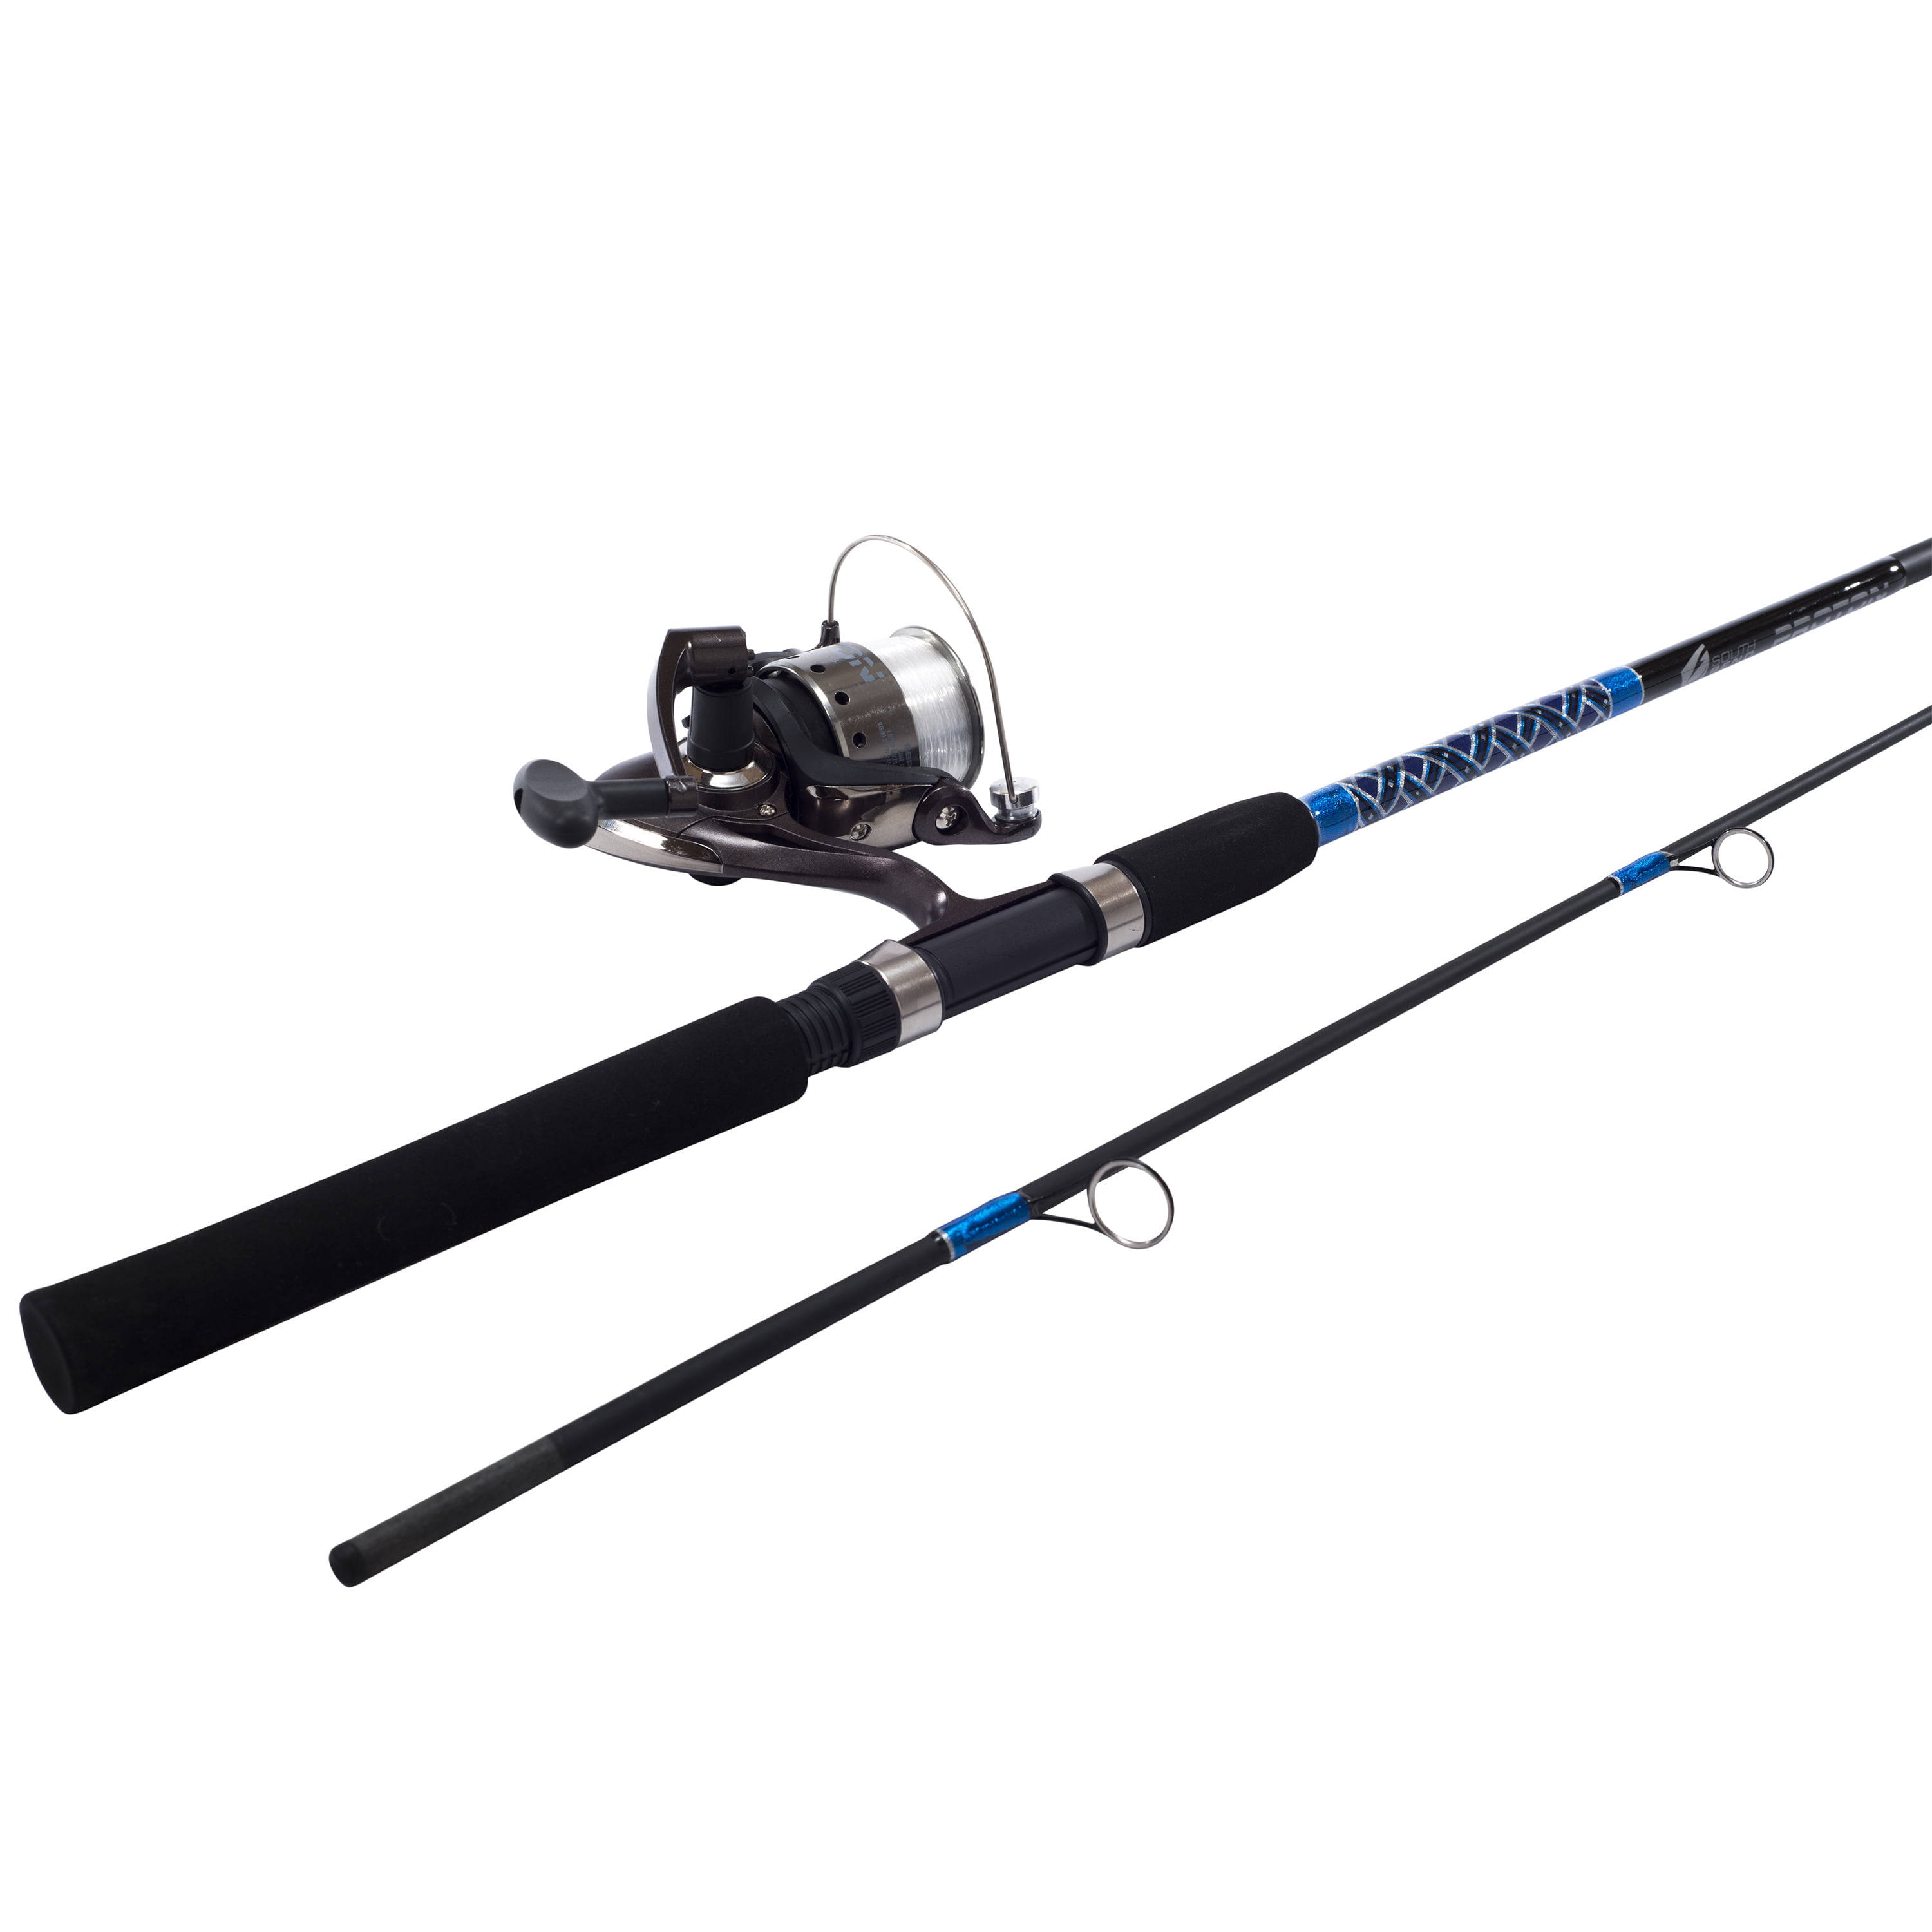 South Bend SBP230/662MS Proton 6'6Spinning Combo